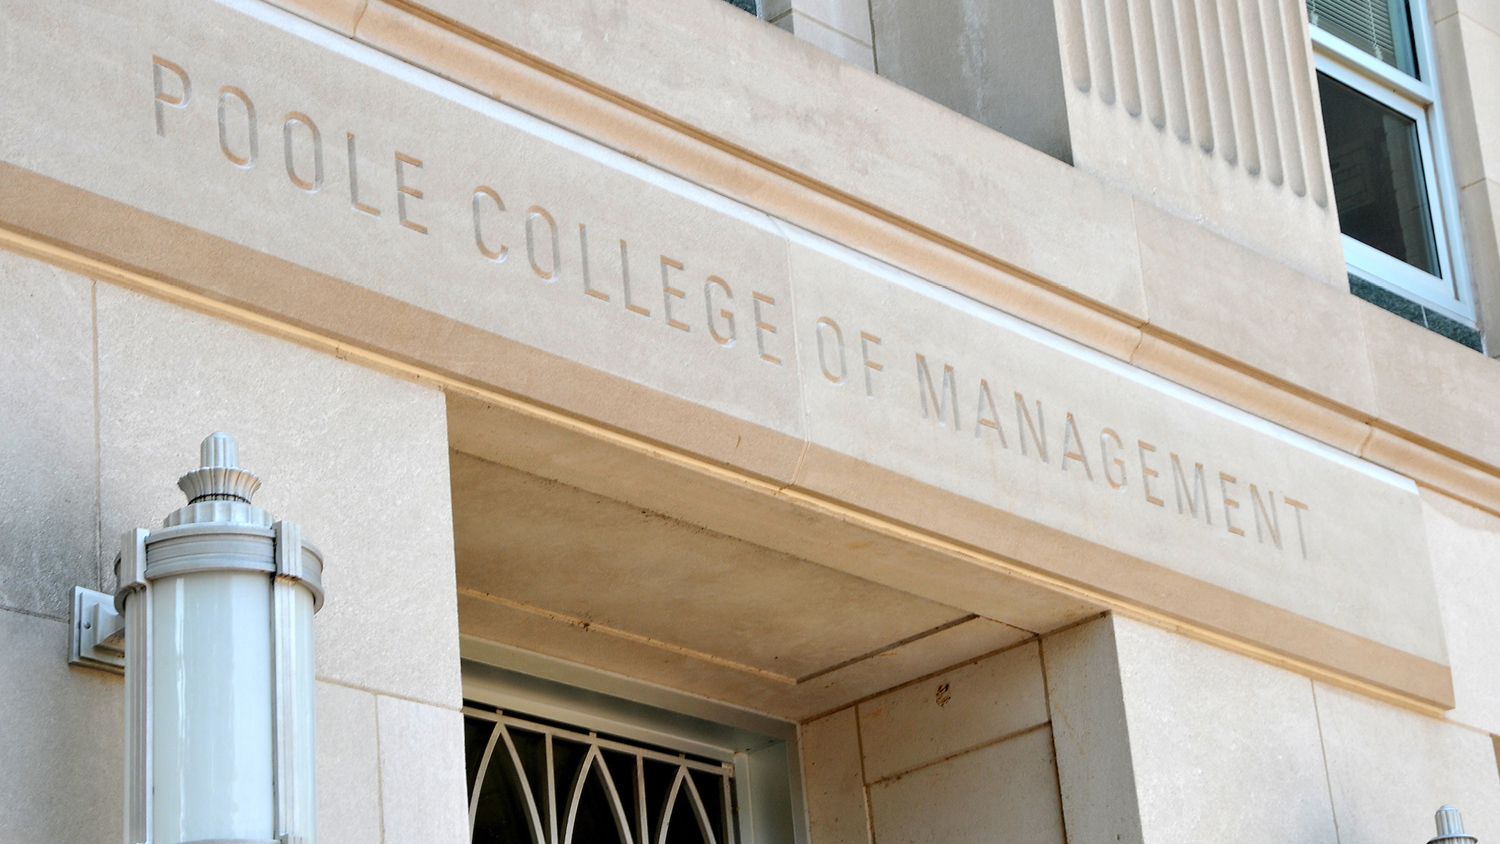 A close-up of the words 'Poole College of Management' engraved on the front of Nelson Hall